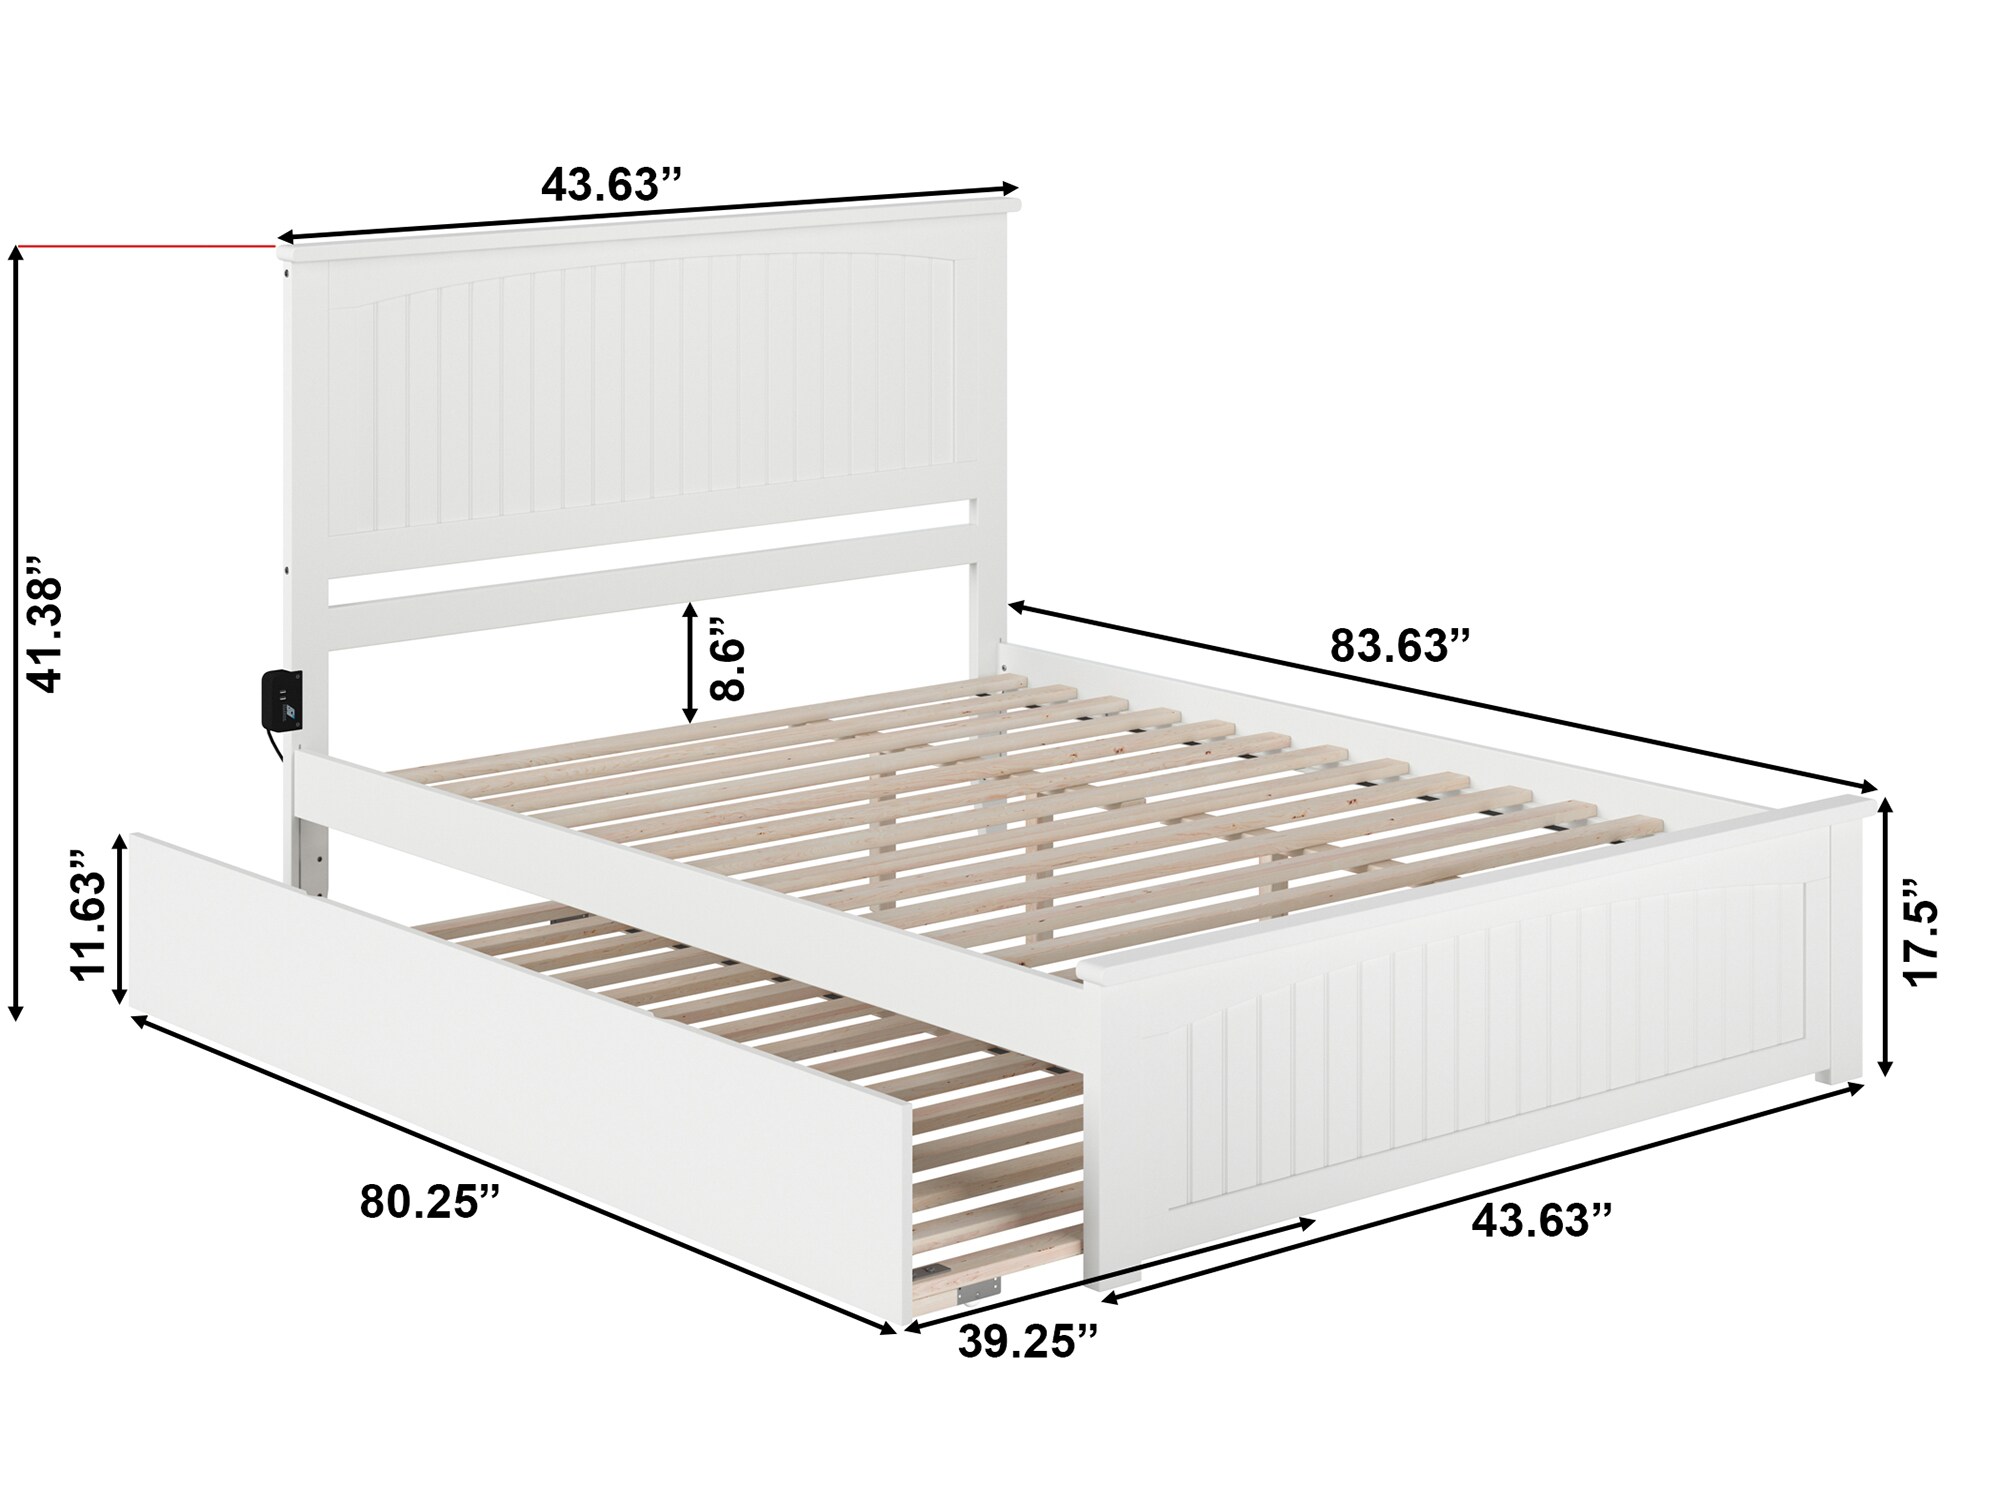 AFI Furnishings Nantucket White Queen Wood Trundle Bed at Lowes.com